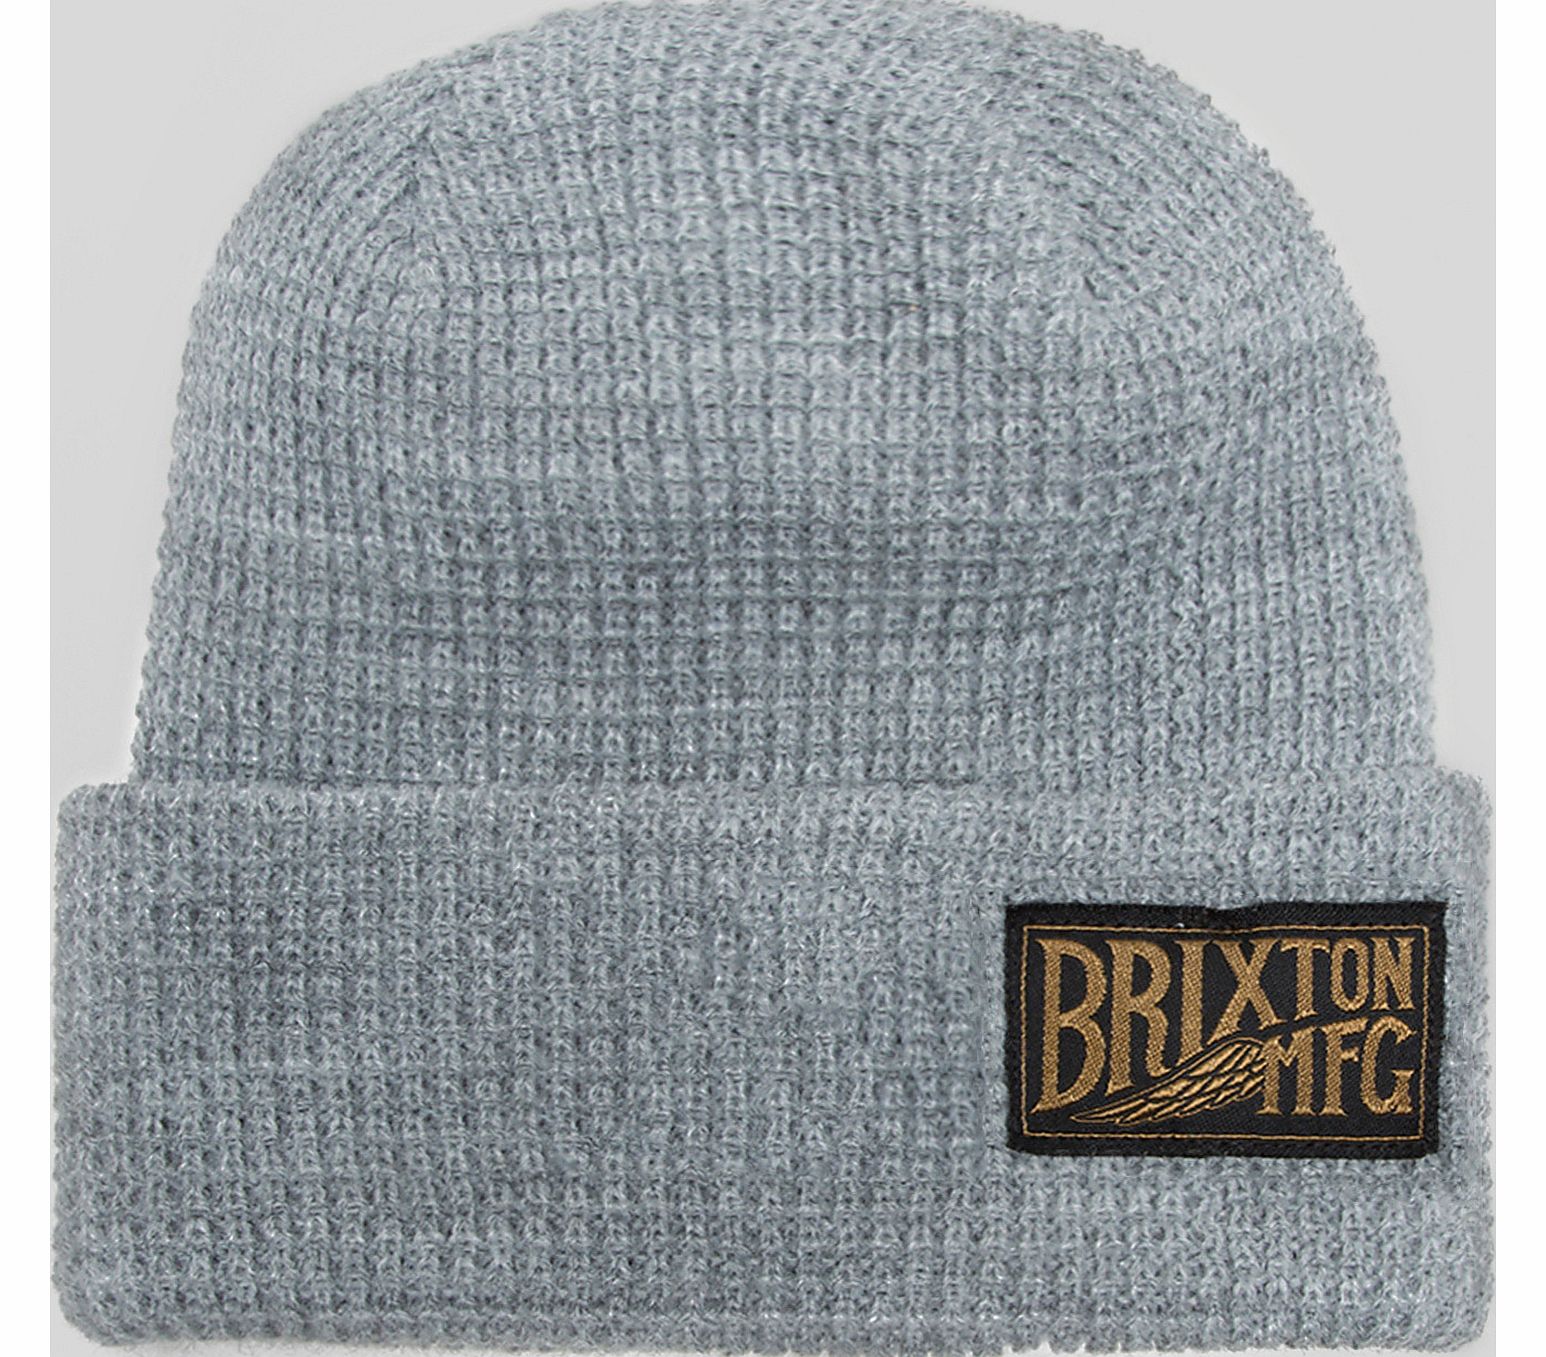 Brixton Coventry Beanie Hat